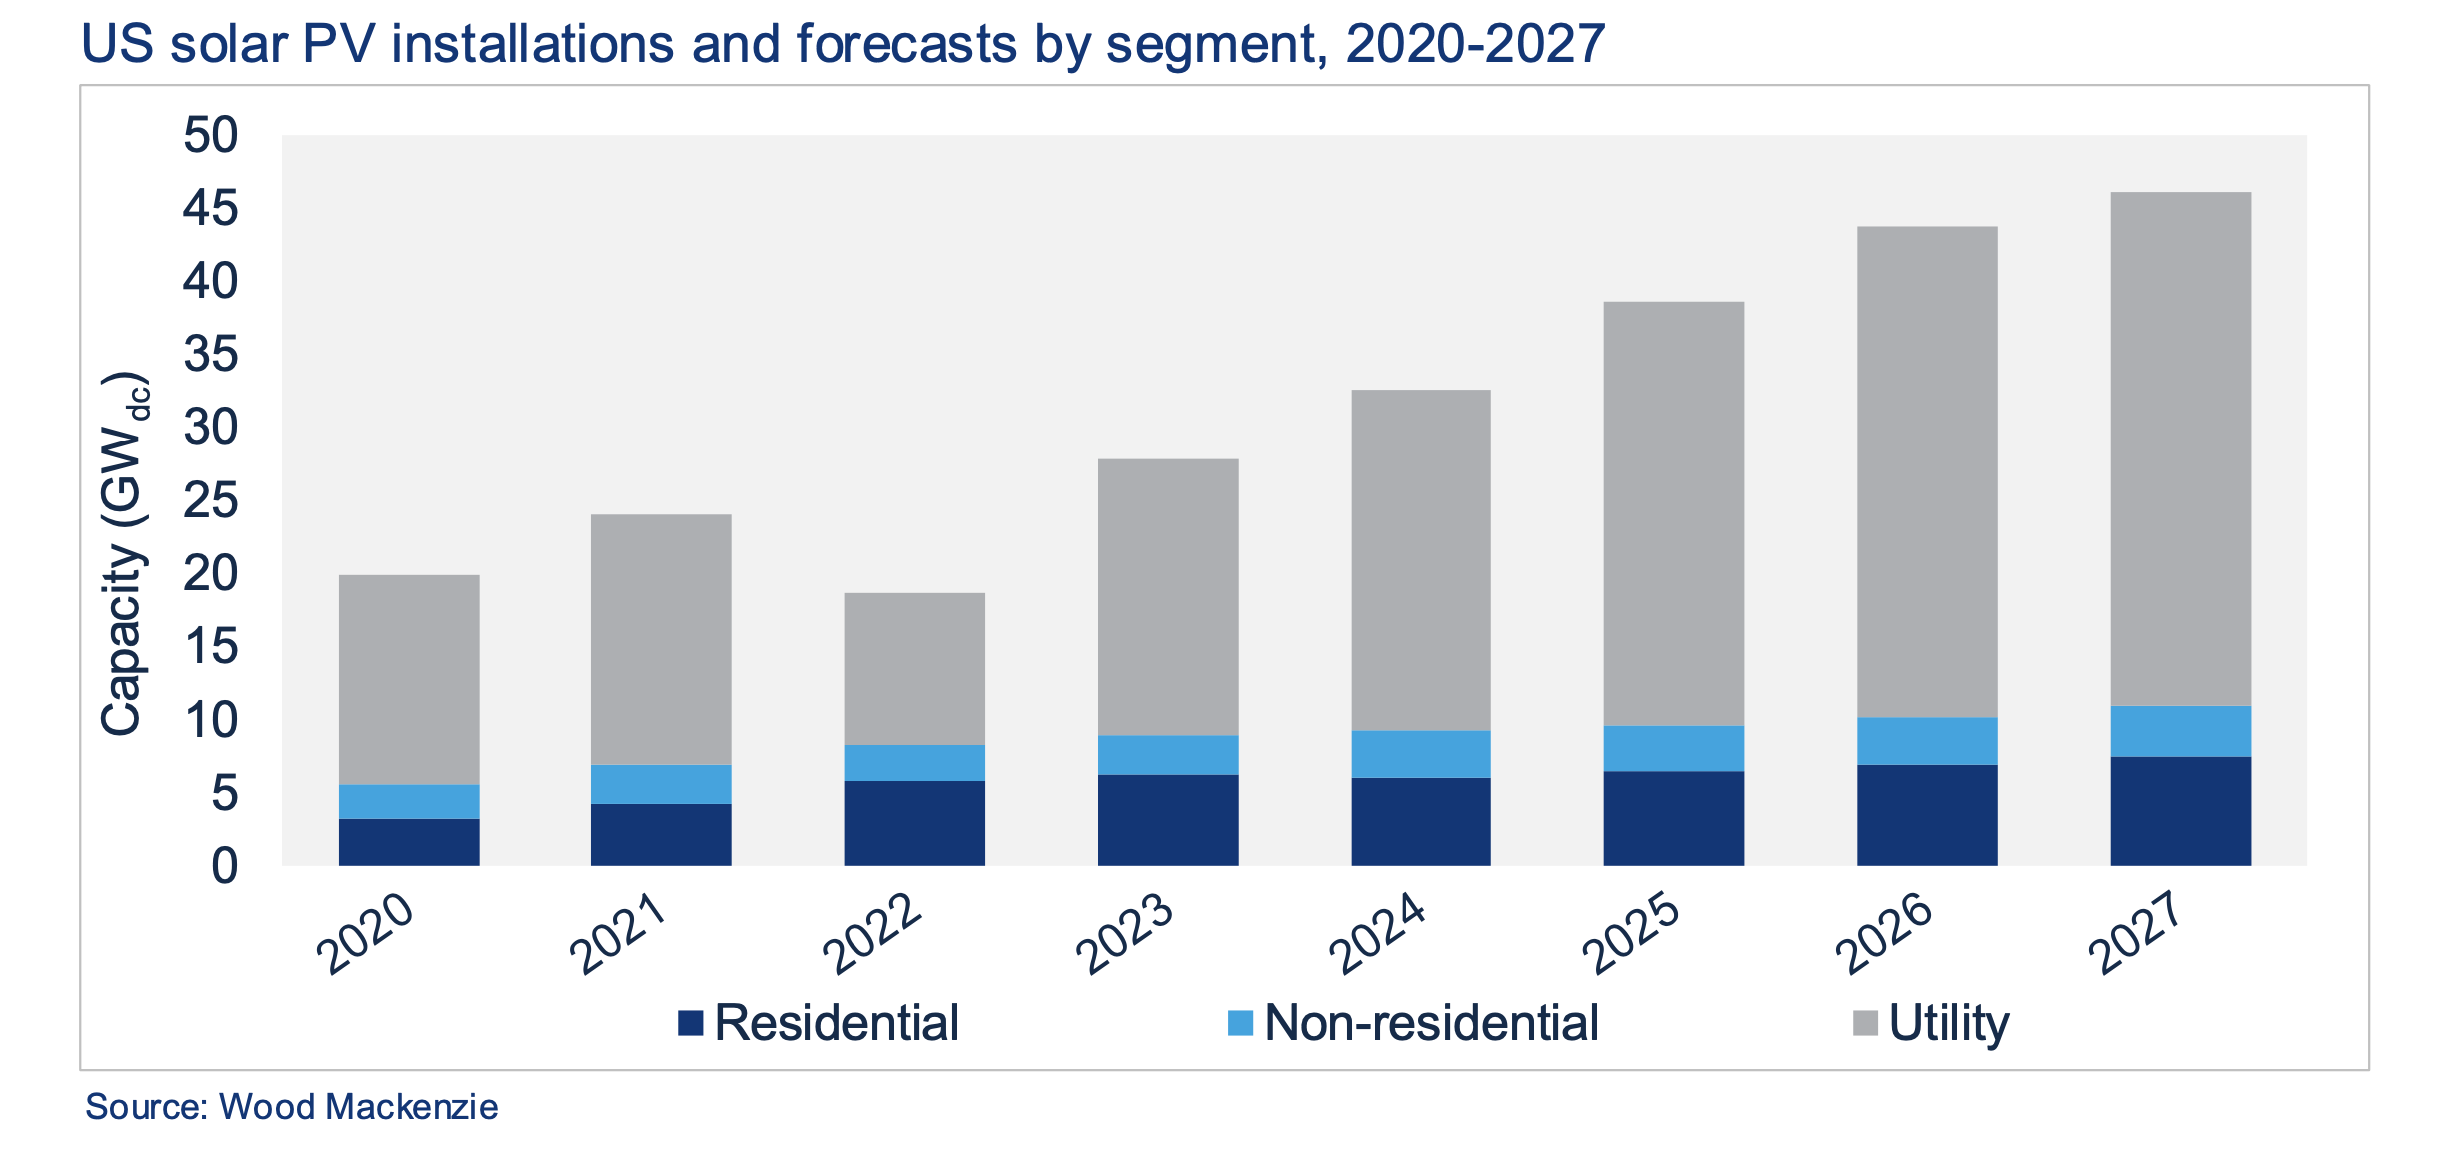 U.S. solar PV installations and forecasts by segment, 2020-2027. 